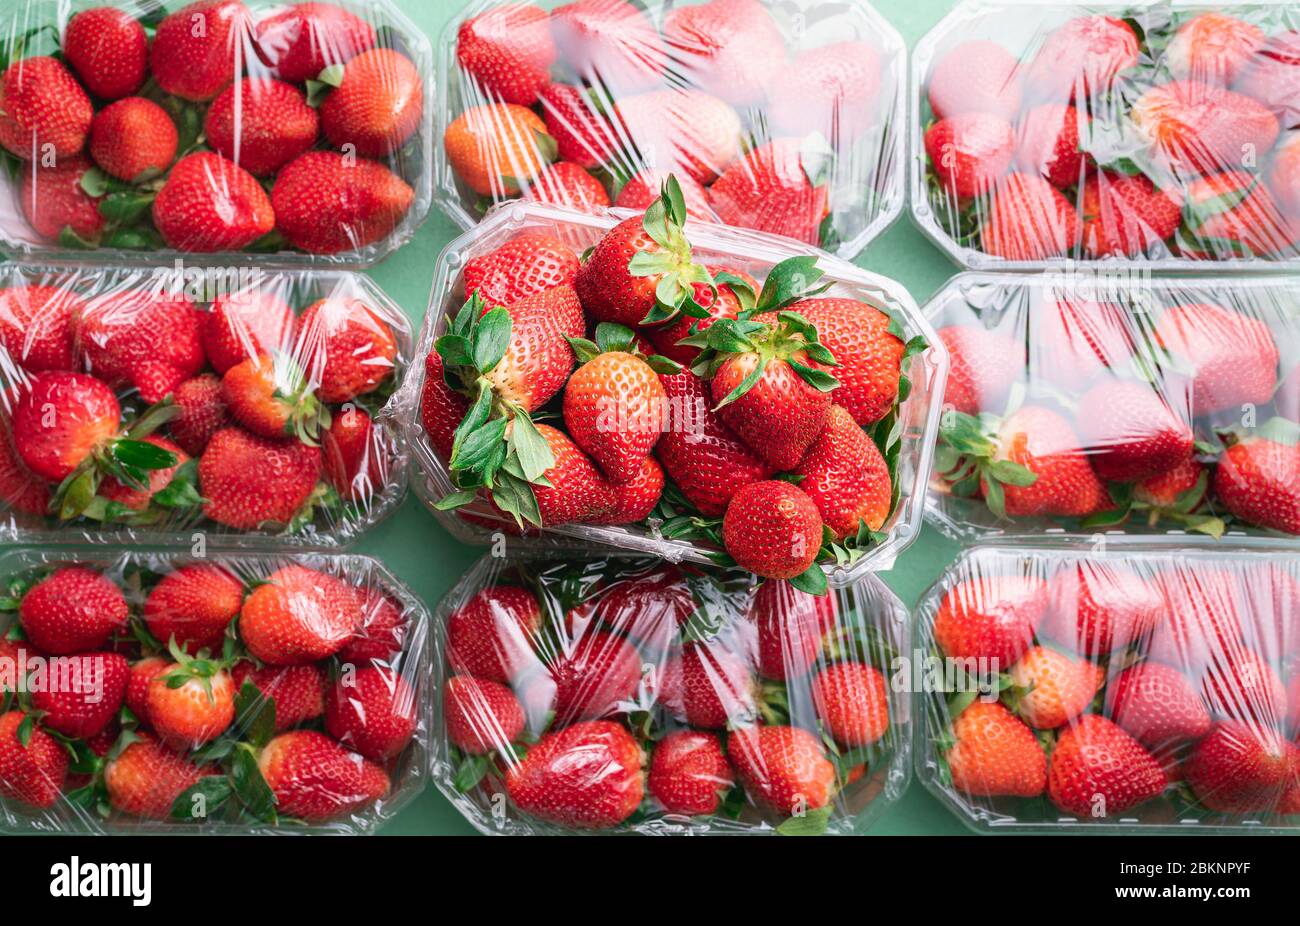 Many strawberries in boxes ready to buy. Flat lay with fresh ripe strawberry fruits. Sweet summer fruits abundance. Strawberry season concept. Stock Photo